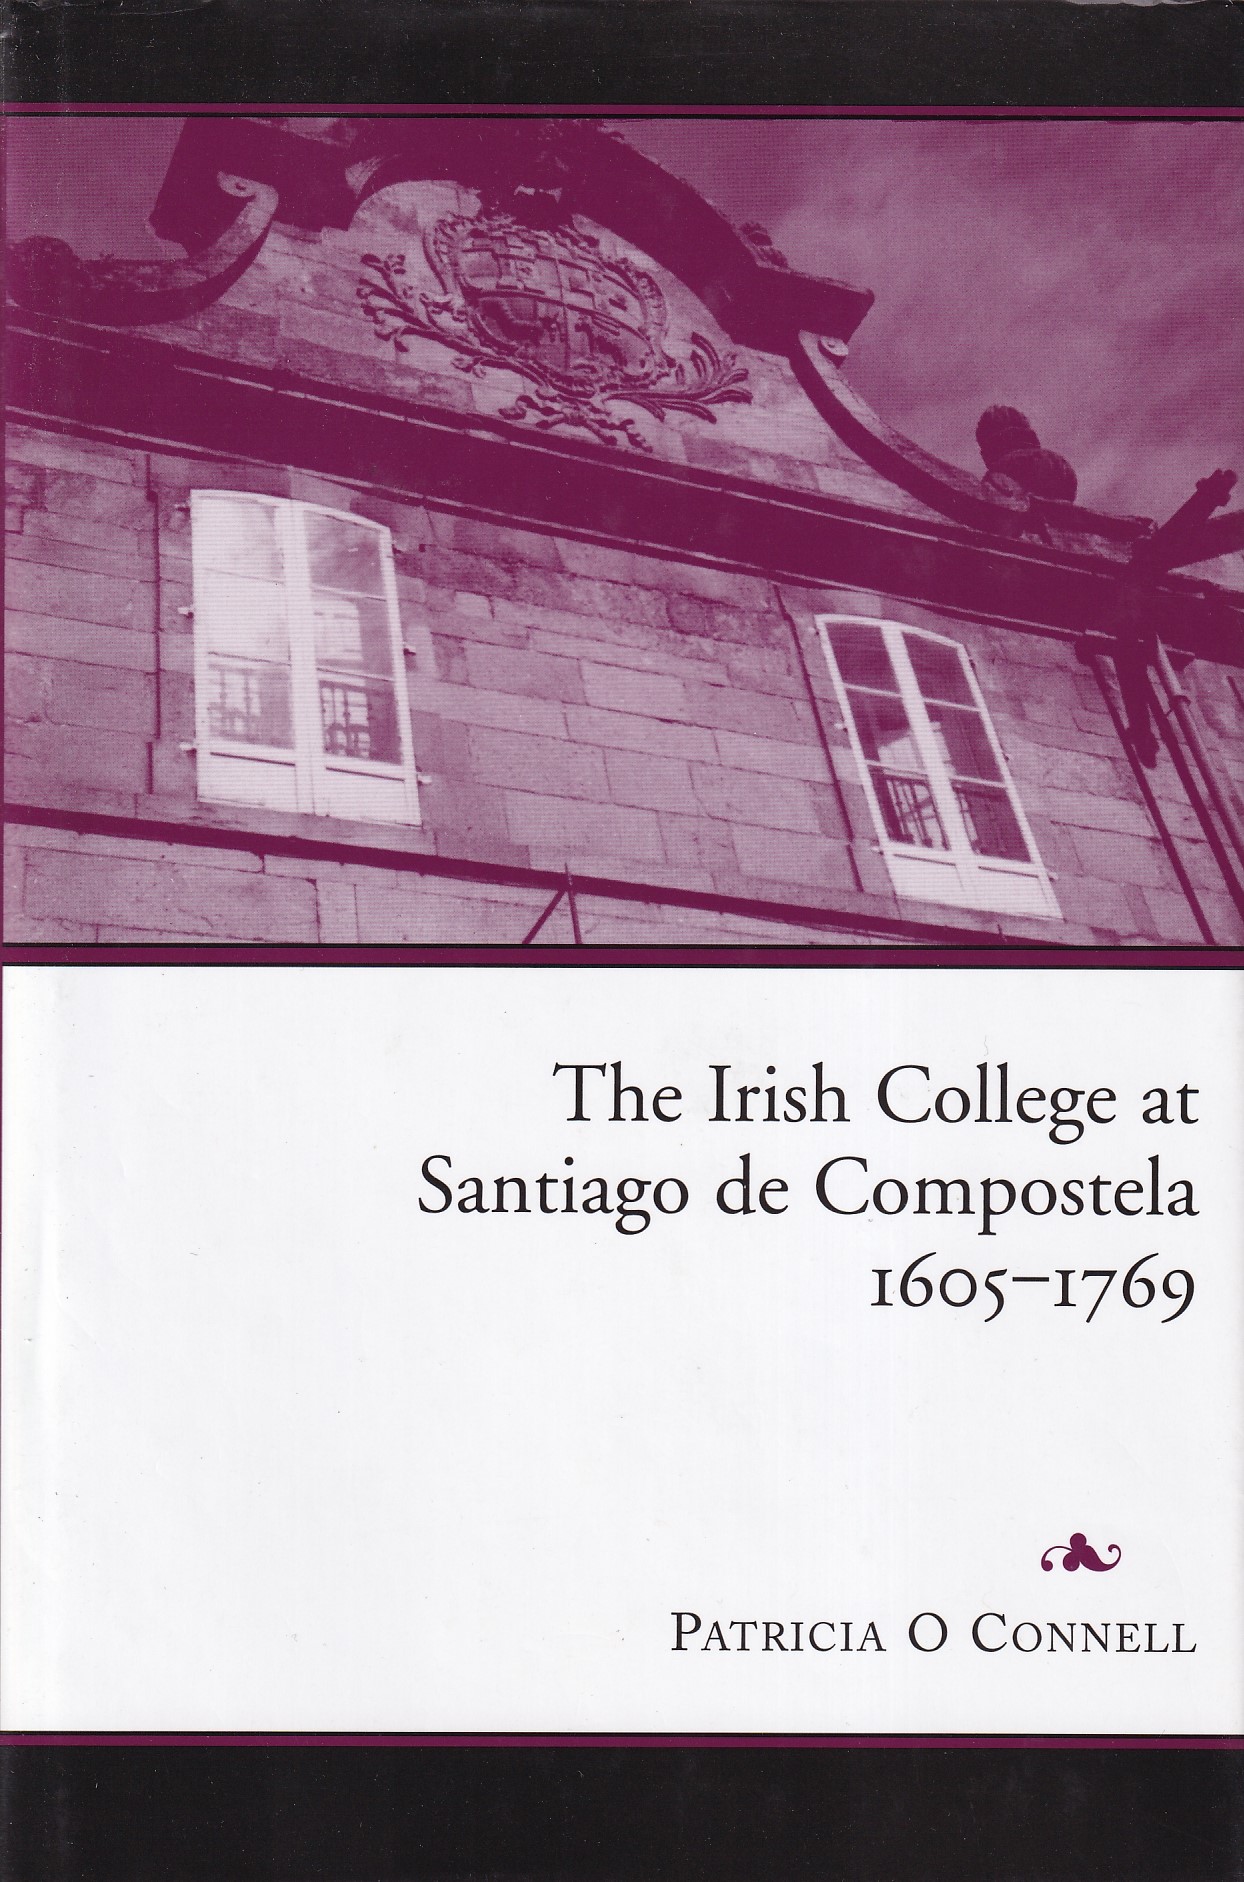 The Irish College at Santiago de Compostela, 1605 – 1769 by Patricia O Connell